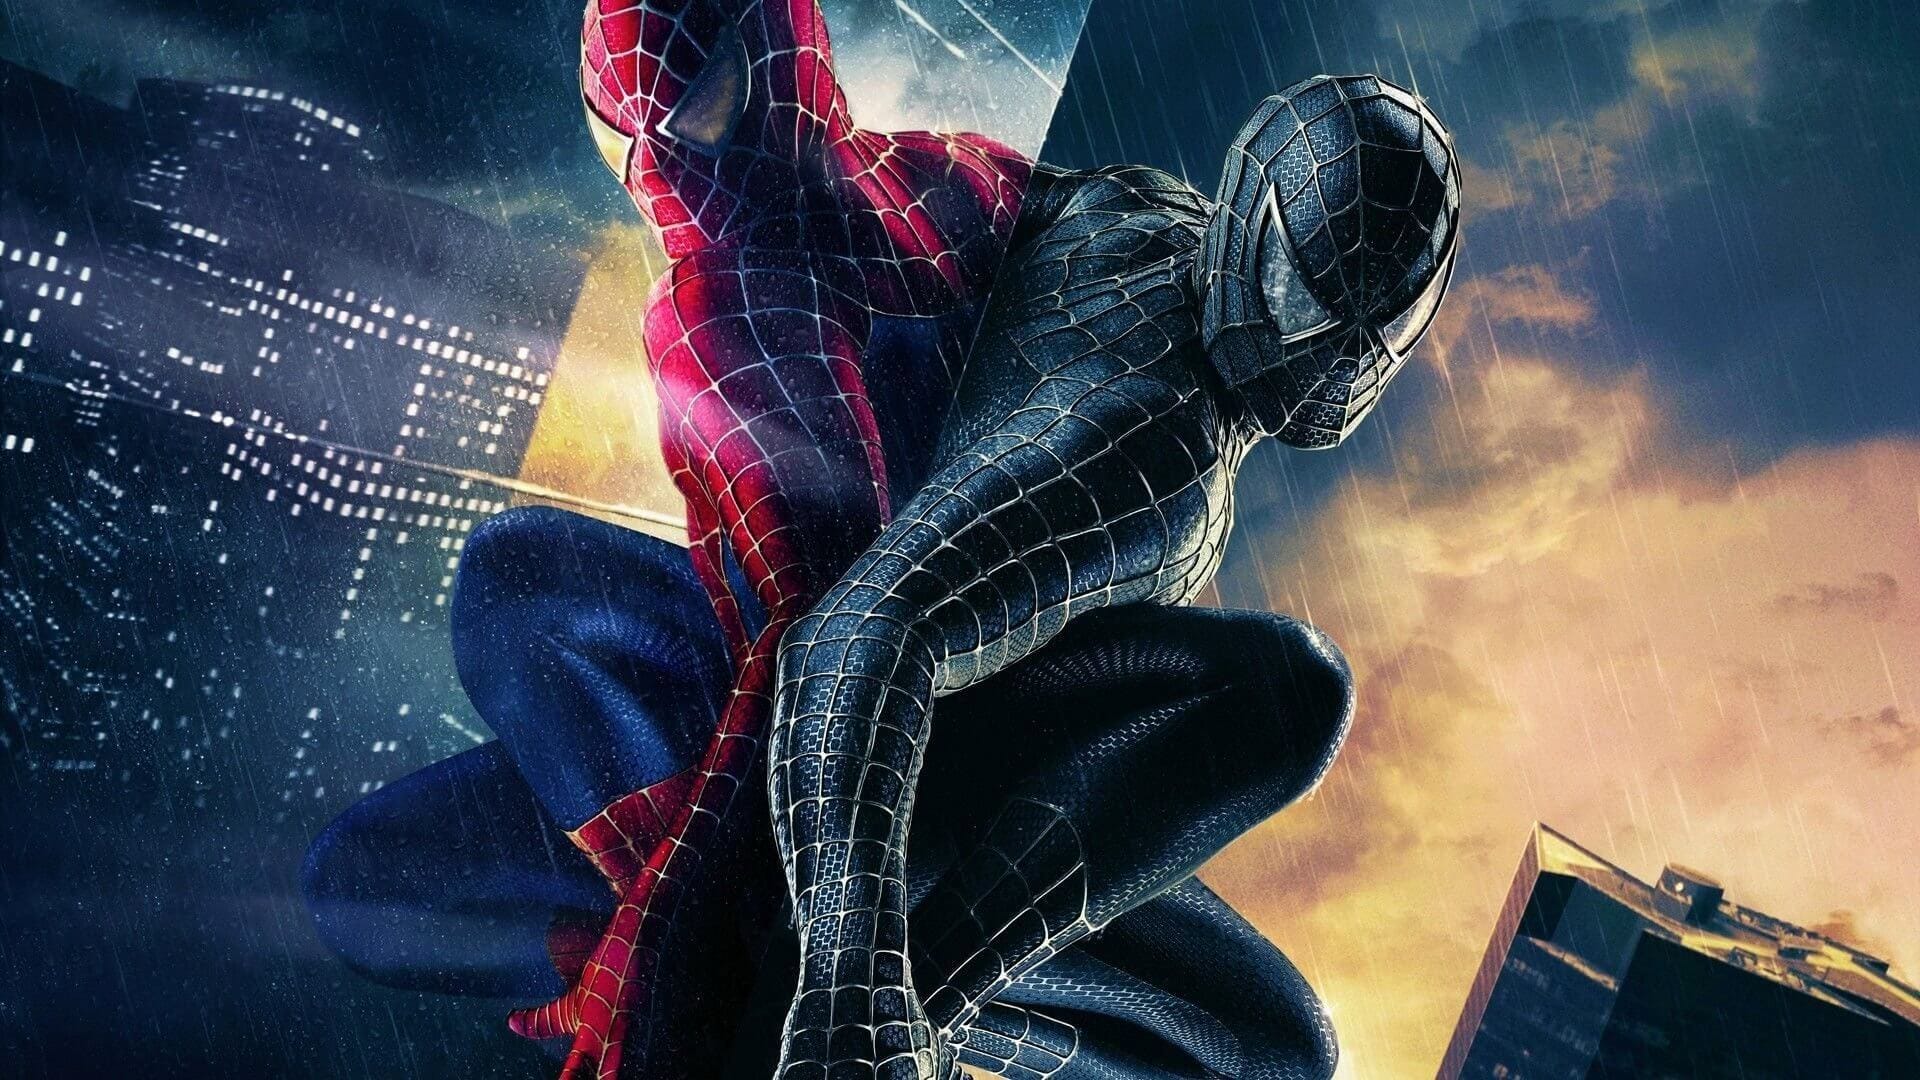 Spider-Man 2 review: twice the spider-men, twice the emo fun - The Verge